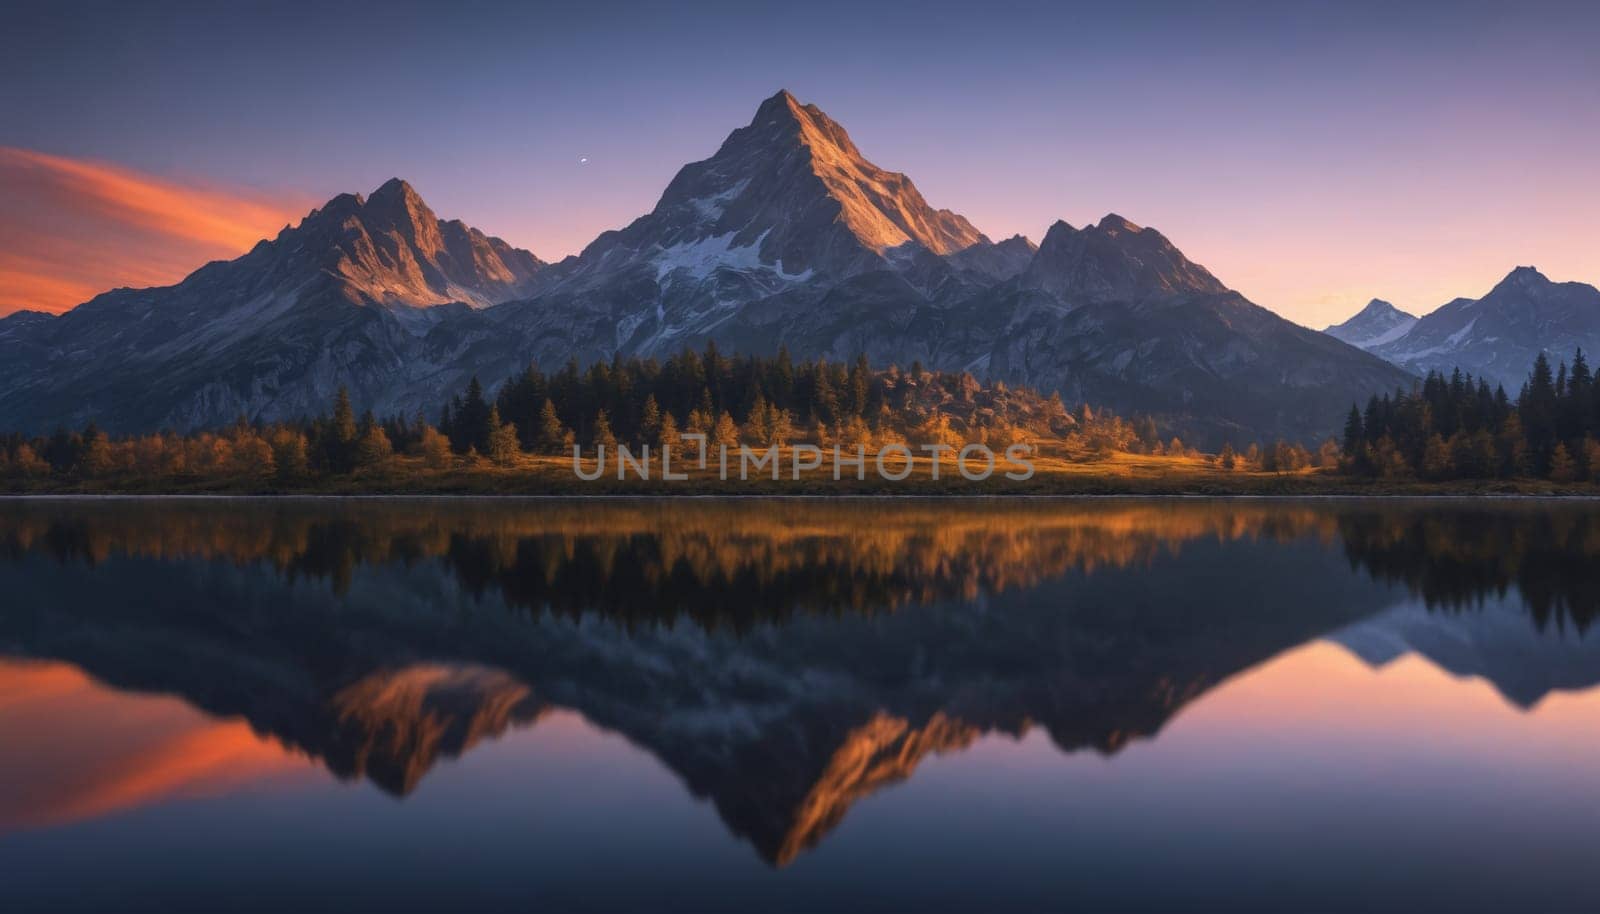 A serene alpine lake reflects the majestic silhouette of a snow-capped mountain range, bathed in the warm hues of sunrise. The foreground features a tranquil lake surface, while the background showcases the towering peaks and a lush forest lining the shoreline.